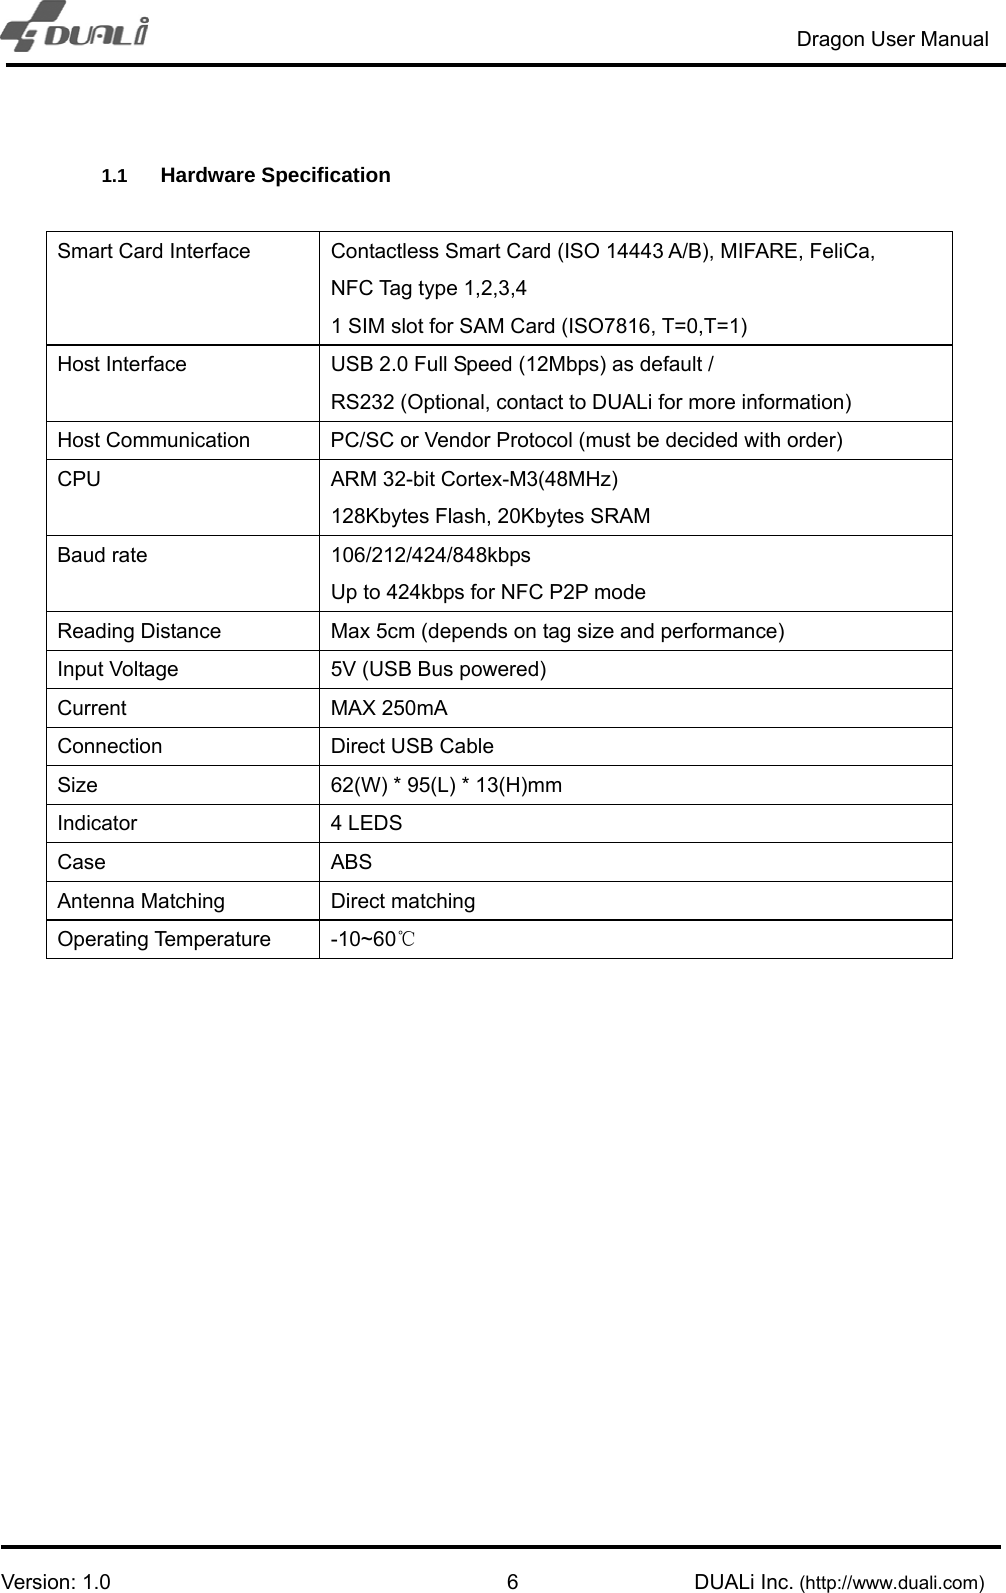                                                                         Dragon User Manual        Version: 1.0                                                        DUALi Inc. (http://www.duali.com) 6 1.1  Hardware Specification  Smart Card Interface  Contactless Smart Card (ISO 14443 A/B), MIFARE, FeliCa,   NFC Tag type 1,2,3,4 1 SIM slot for SAM Card (ISO7816, T=0,T=1) Host Interface  USB 2.0 Full Speed (12Mbps) as default /   RS232 (Optional, contact to DUALi for more information) Host Communication  PC/SC or Vendor Protocol (must be decided with order) CPU  ARM 32-bit Cortex-M3(48MHz)   128Kbytes Flash, 20Kbytes SRAM Baud rate  106/212/424/848kbps          Up to 424kbps for NFC P2P mode Reading Distance  Max 5cm (depends on tag size and performance) Input Voltage  5V (USB Bus powered) Current MAX 250mA  Connection    Direct USB Cable Size  62(W) * 95(L) * 13(H)mm Indicator 4 LEDS Case ABS Antenna Matching  Direct matching Operating Temperature  -10~60℃                